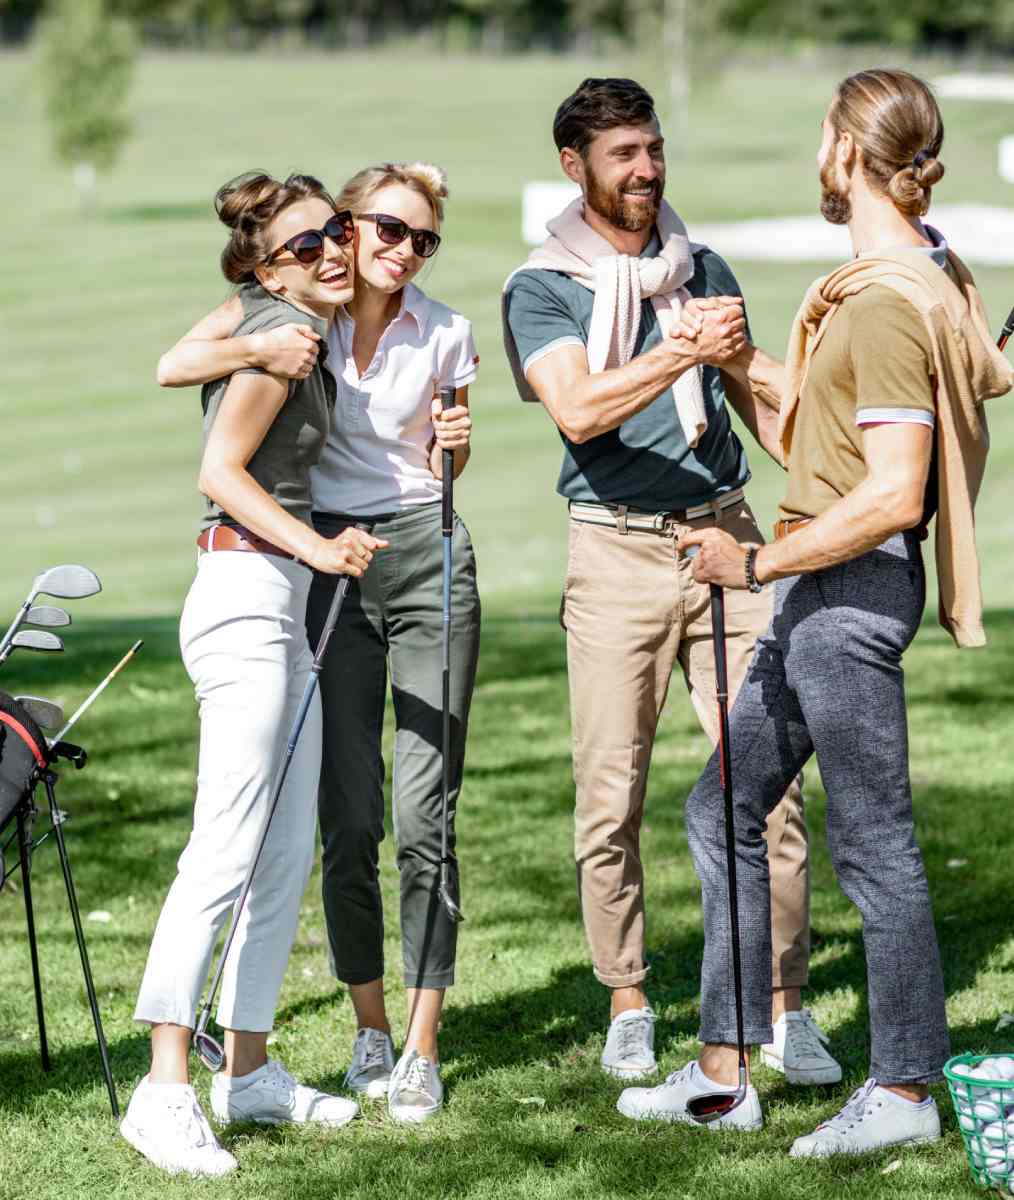 What Sets Mvizz Email Marketing Agency Apart for Golf Course Marketing